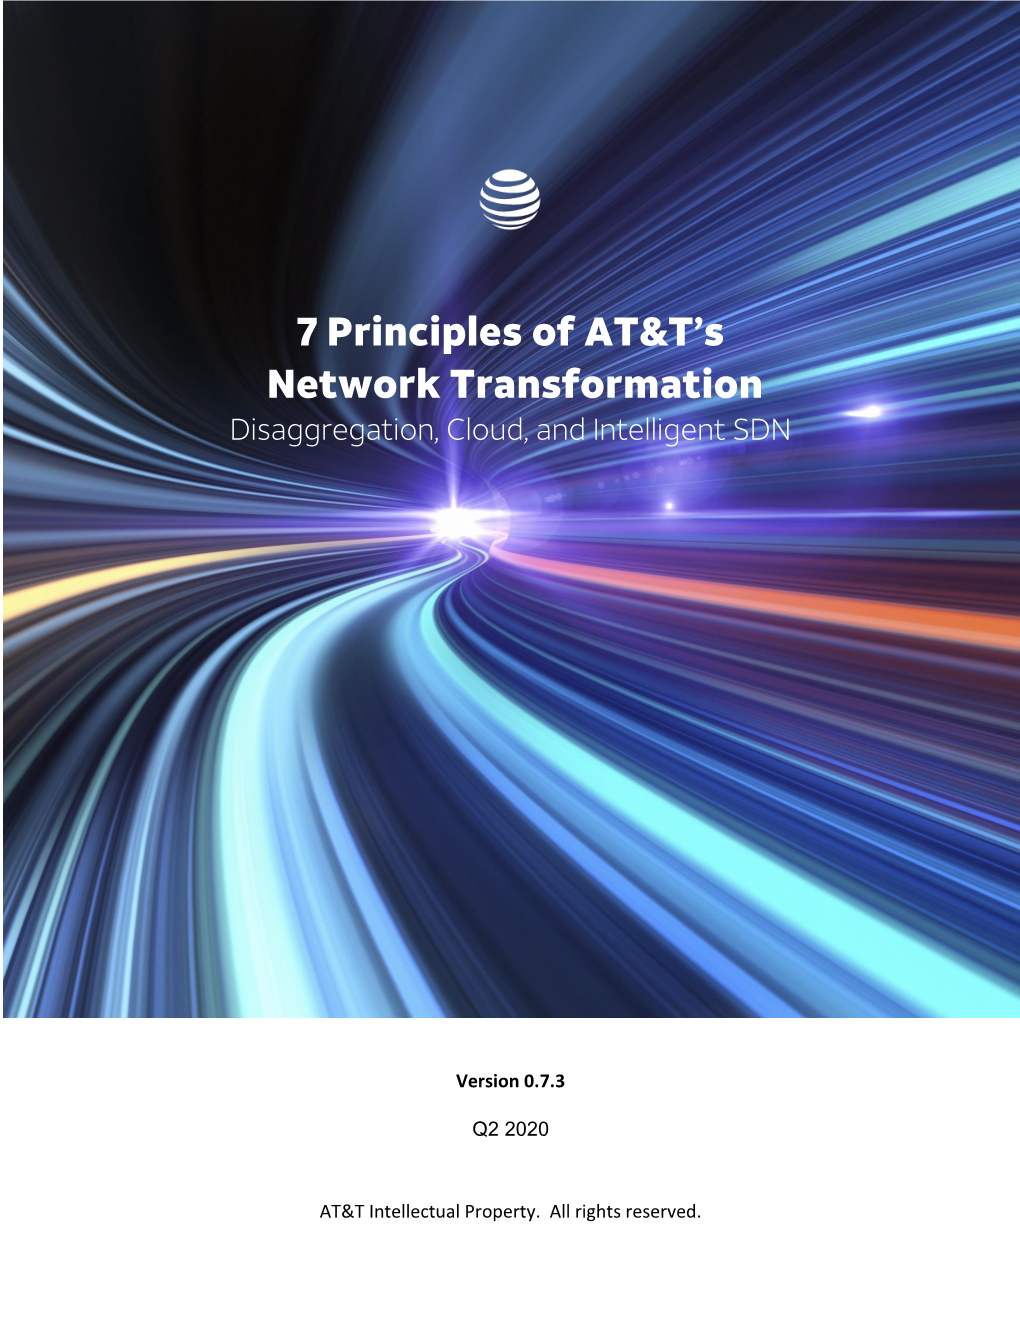 7 Principles of AT&T's Network Transformation